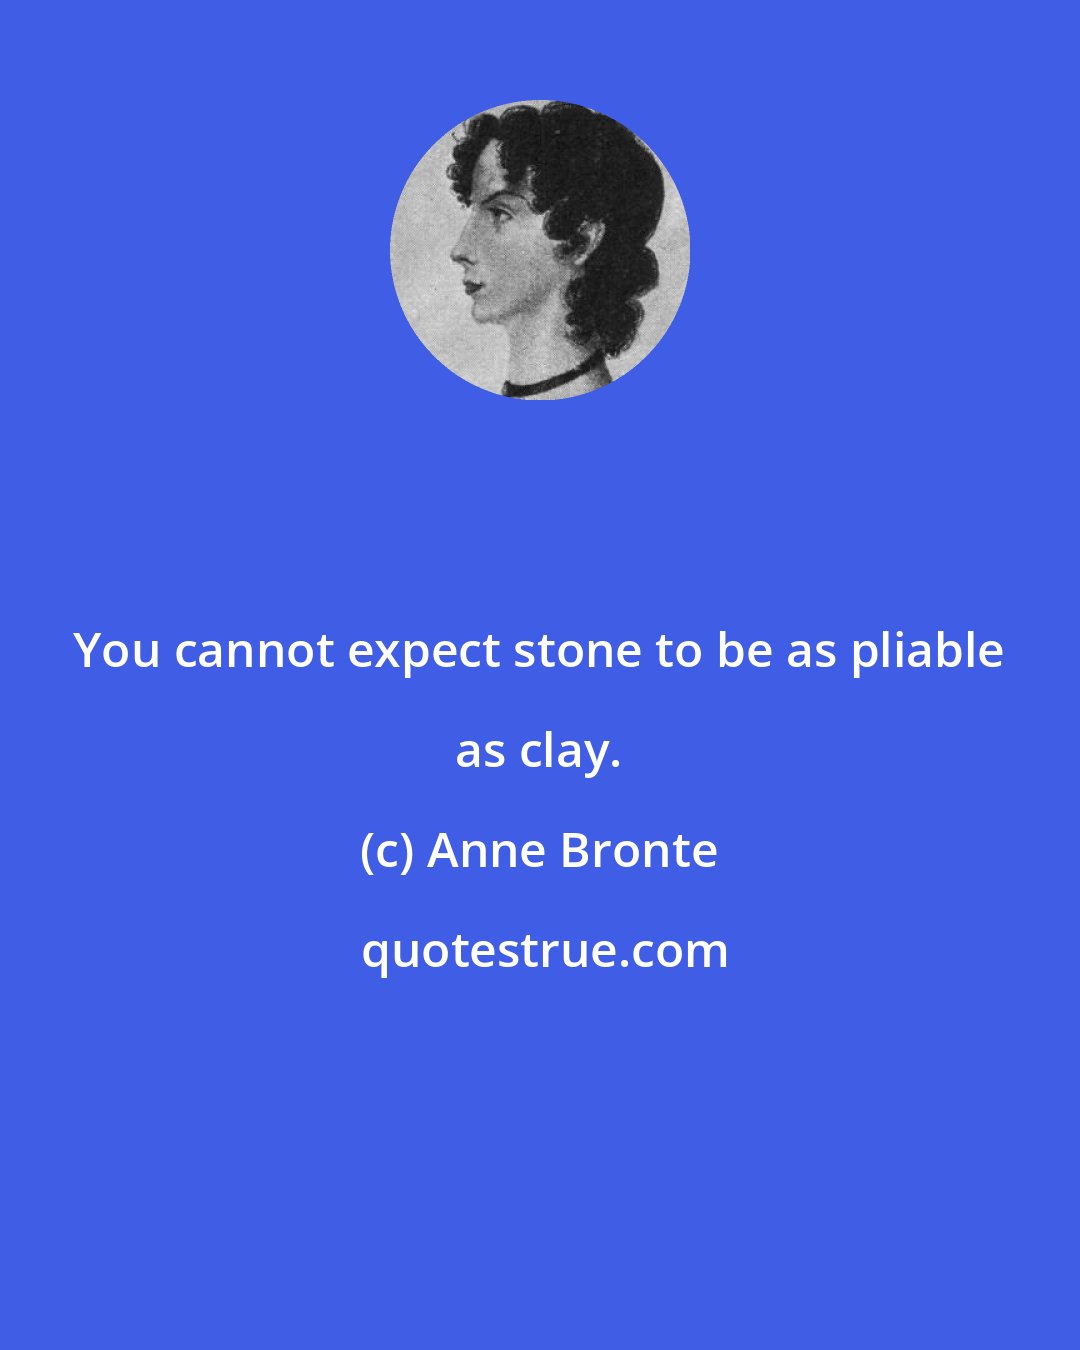 Anne Bronte: You cannot expect stone to be as pliable as clay.